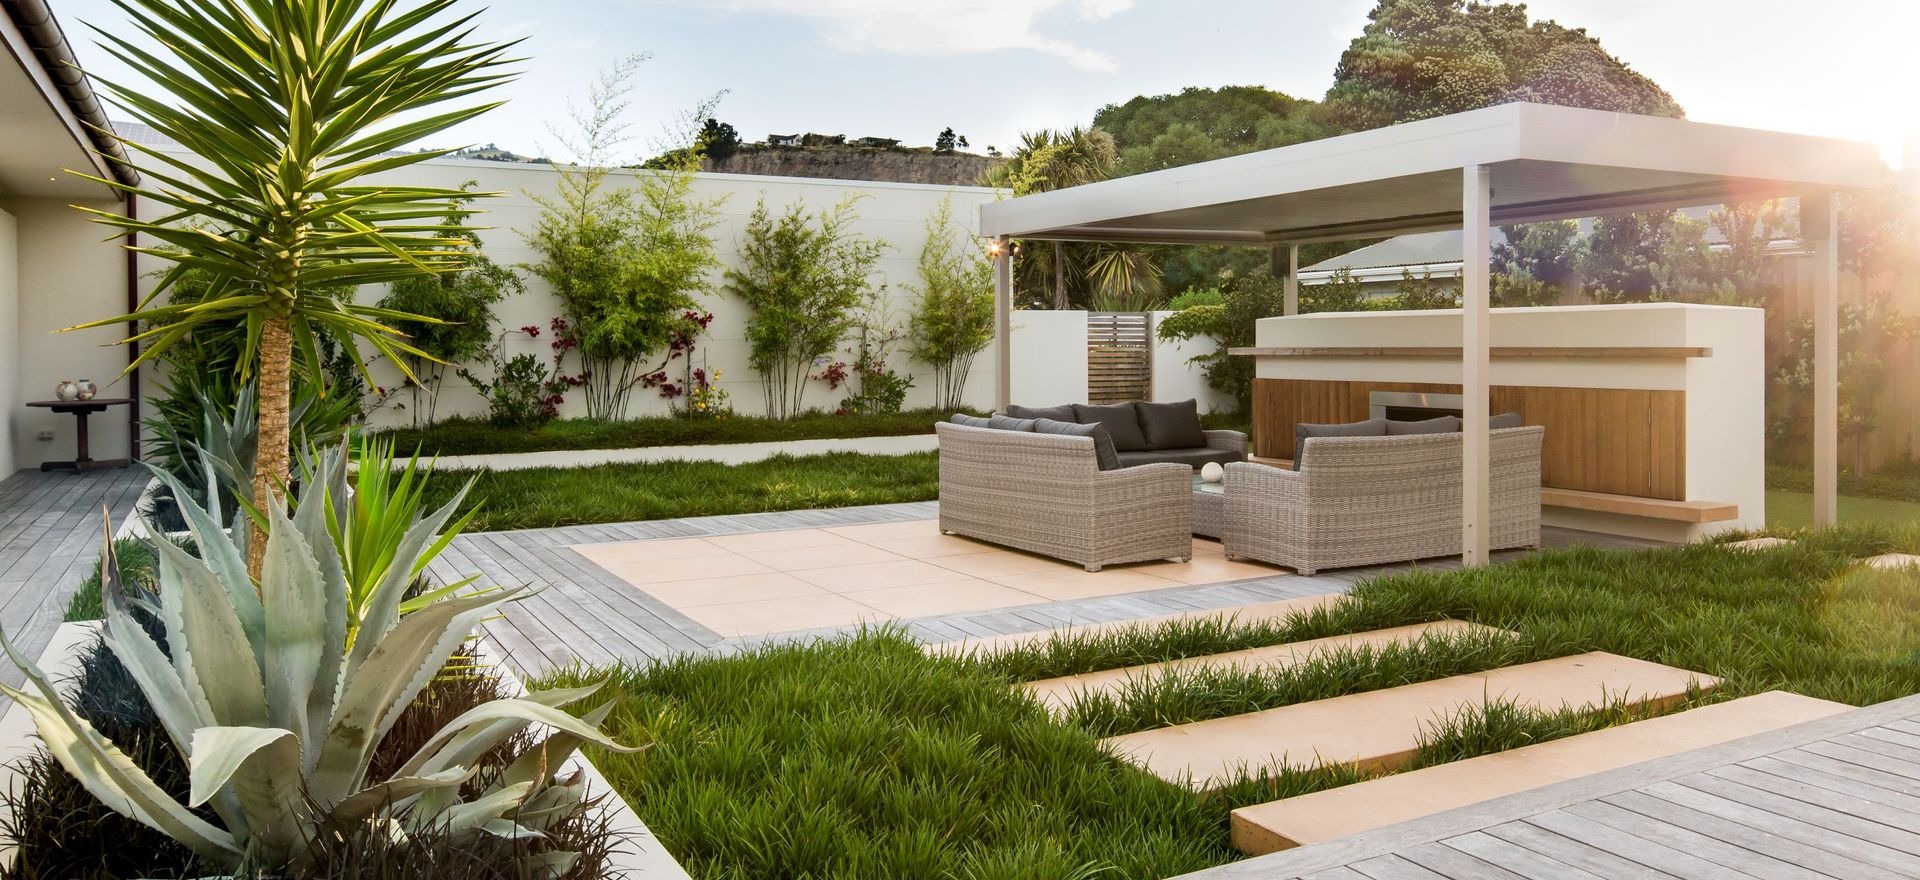 The latest landscaping trends transforming outdoor spaces in New Zealand